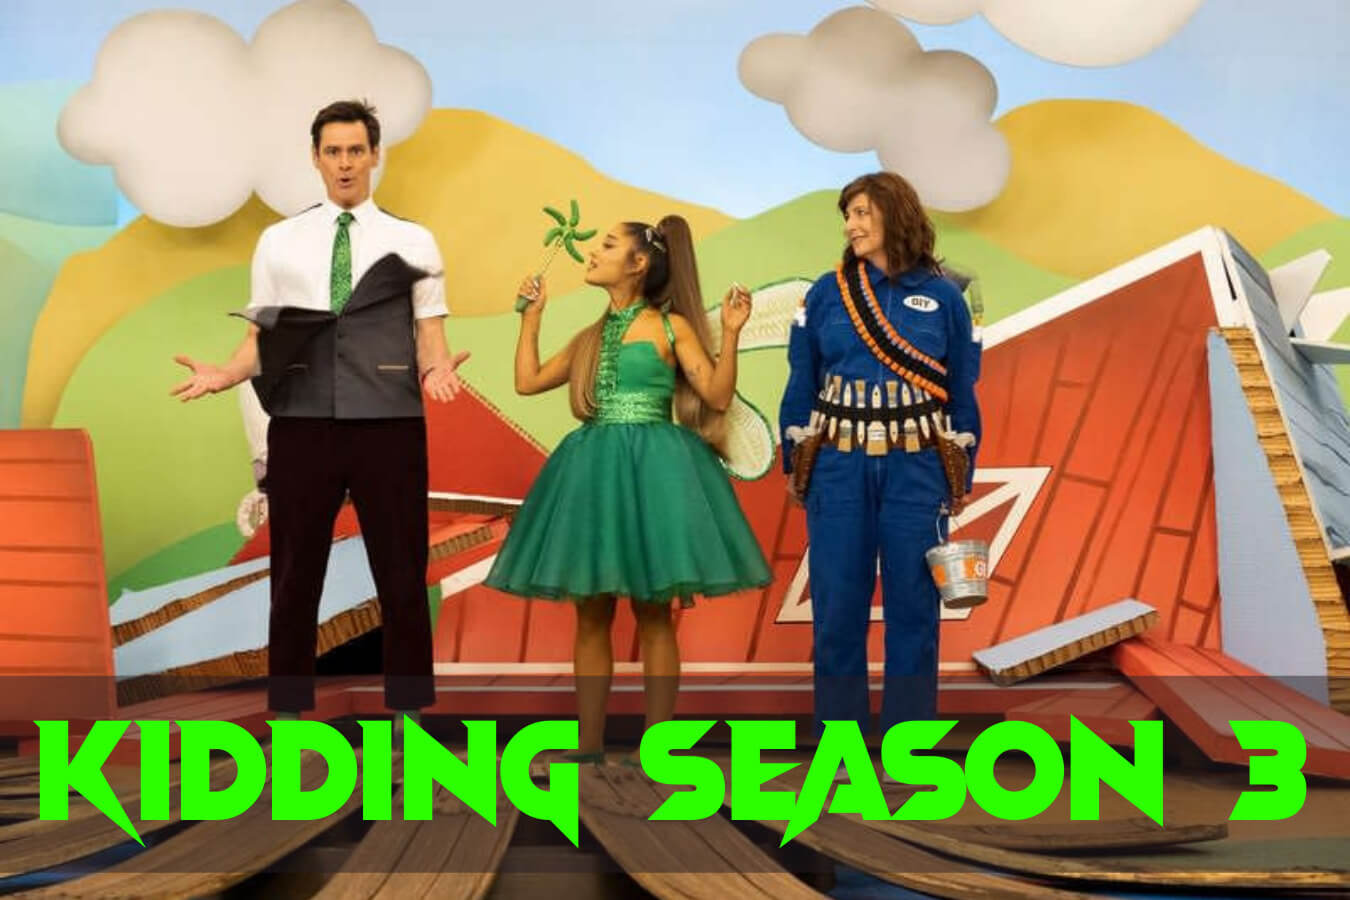 Who Will Be Part Of kidding season 3?